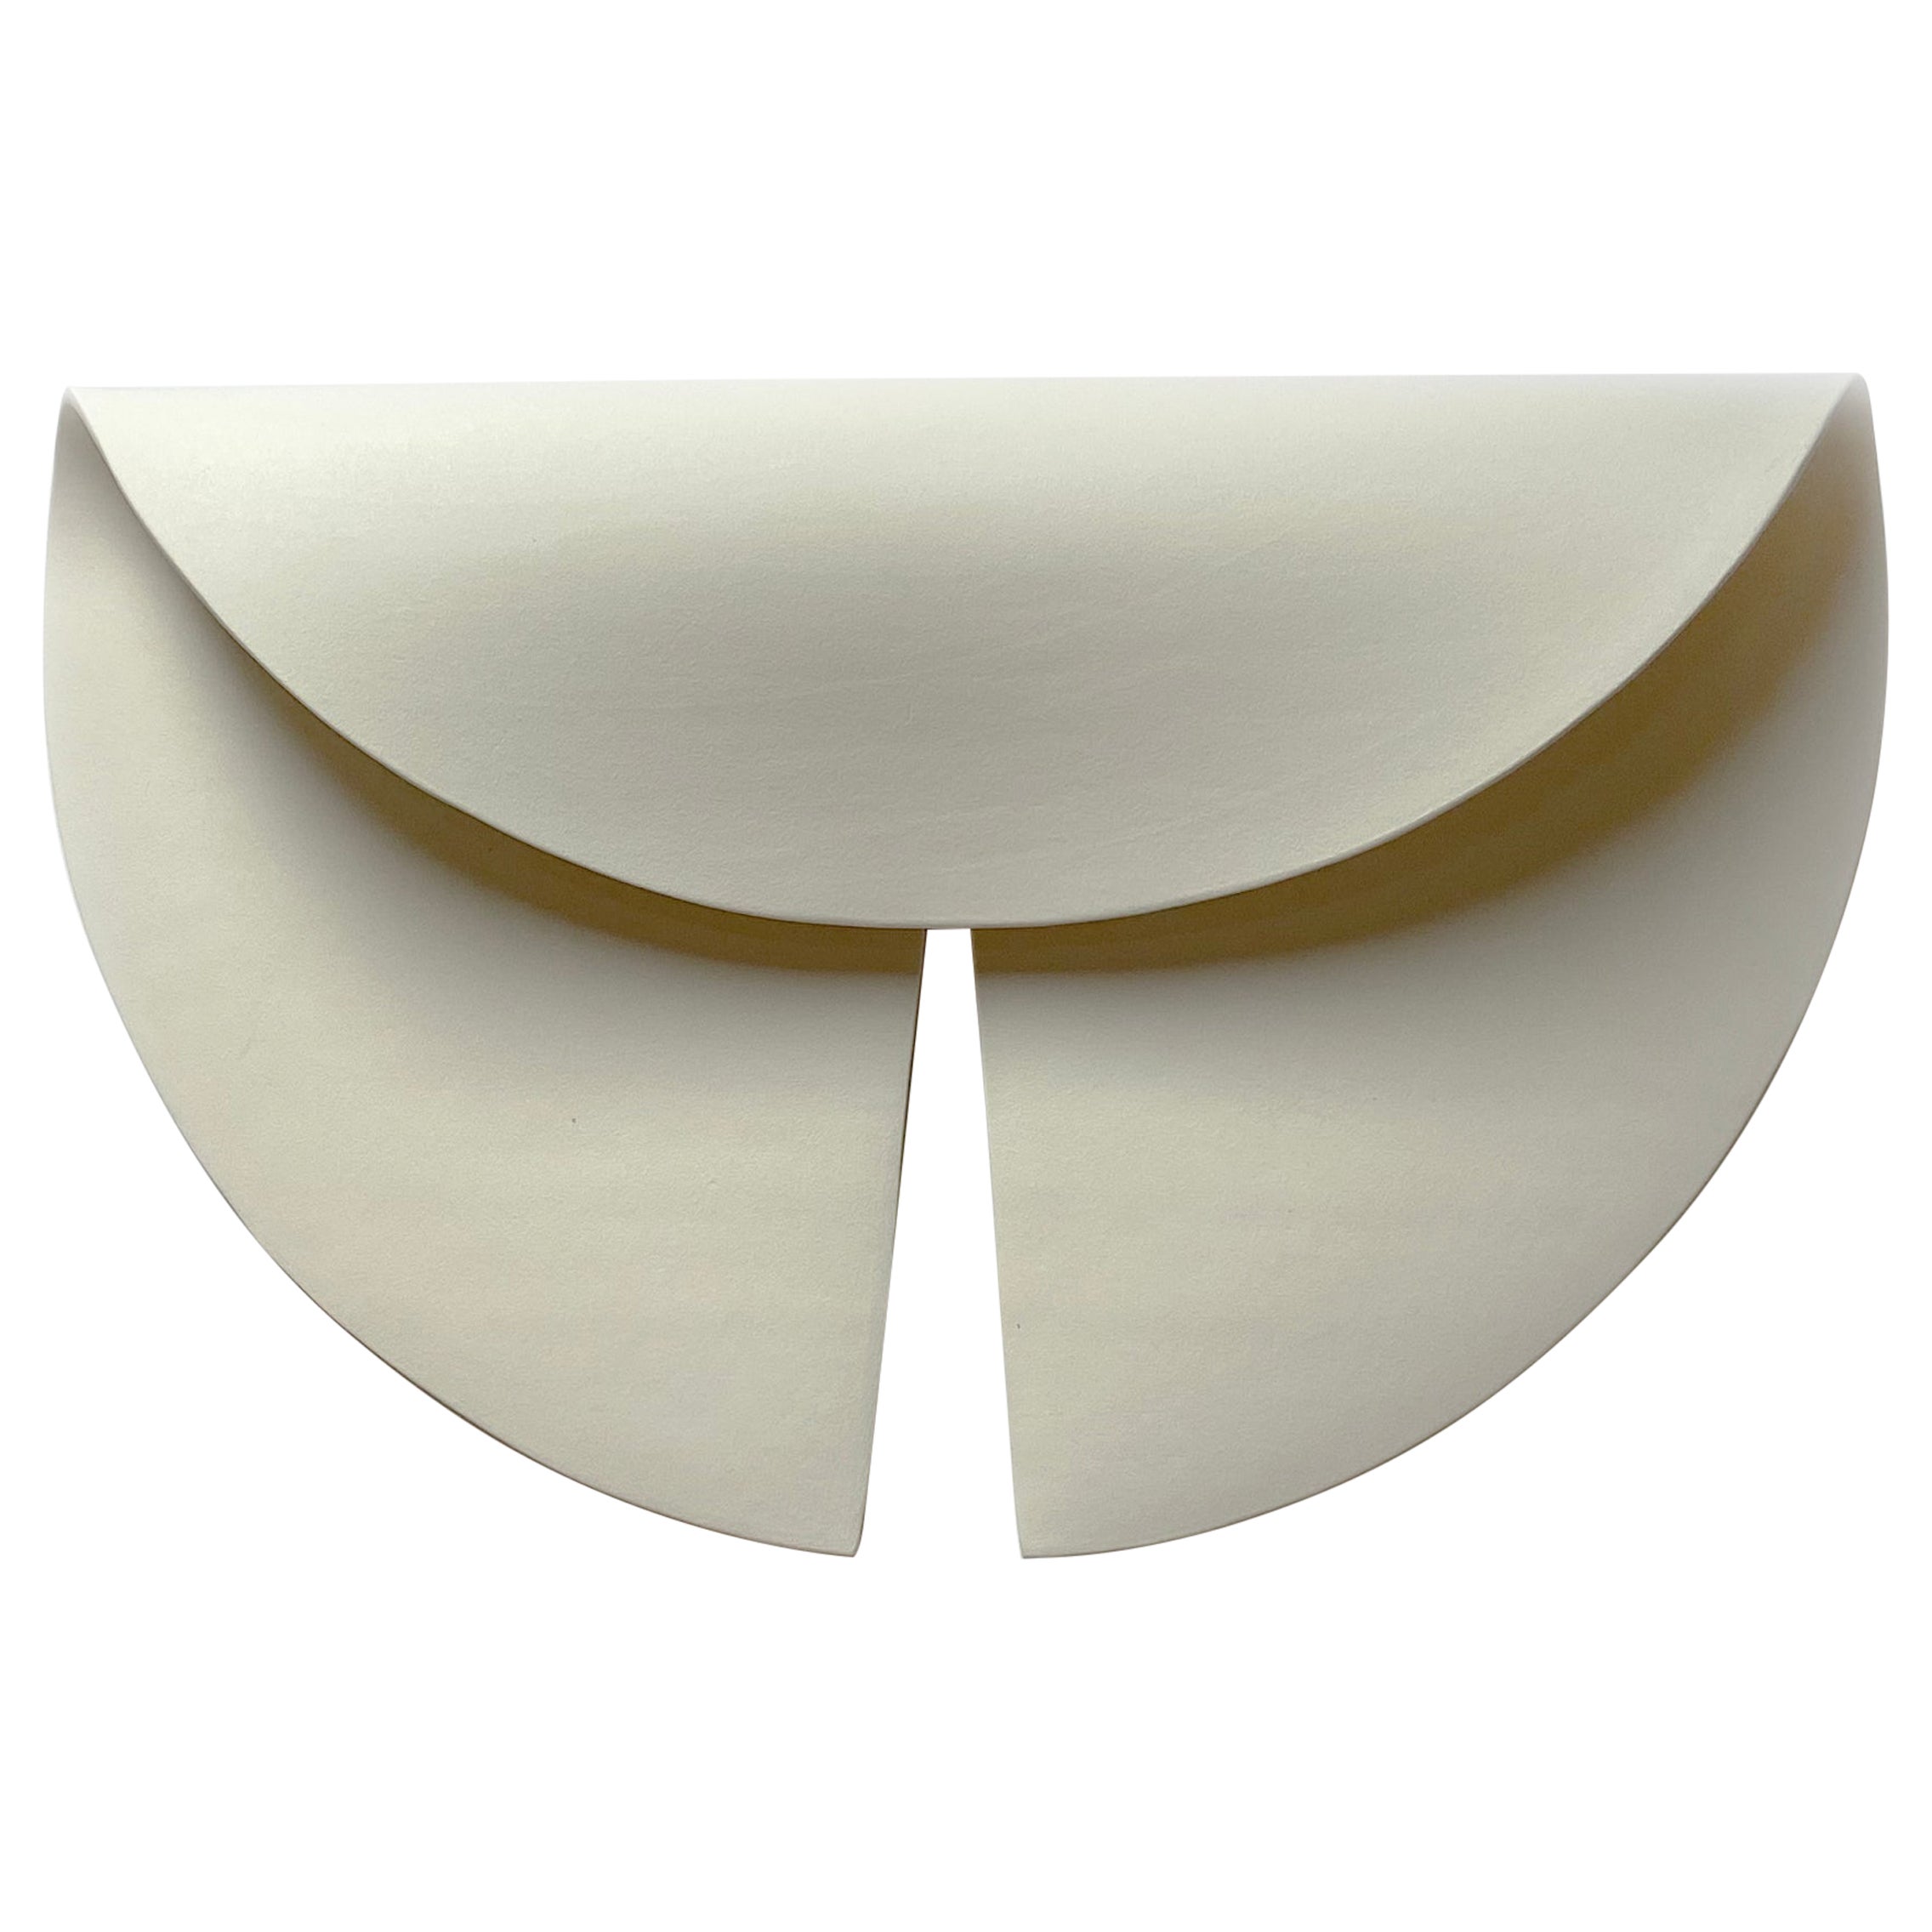 DESCRIPTION: A PAIR OF LEAF WALL SCULPTURES, IDENTICAL
2023
DIMENSIONS: 12” Height, 19” Width, 4” Depth
CLAY BODY: White Earthenware
GLAZE: Matte White
HARDWARE: Simple Mounting Bracket on Reverse
Contact FOR TEARSHEETS OR MORE INFORMATION: 
For